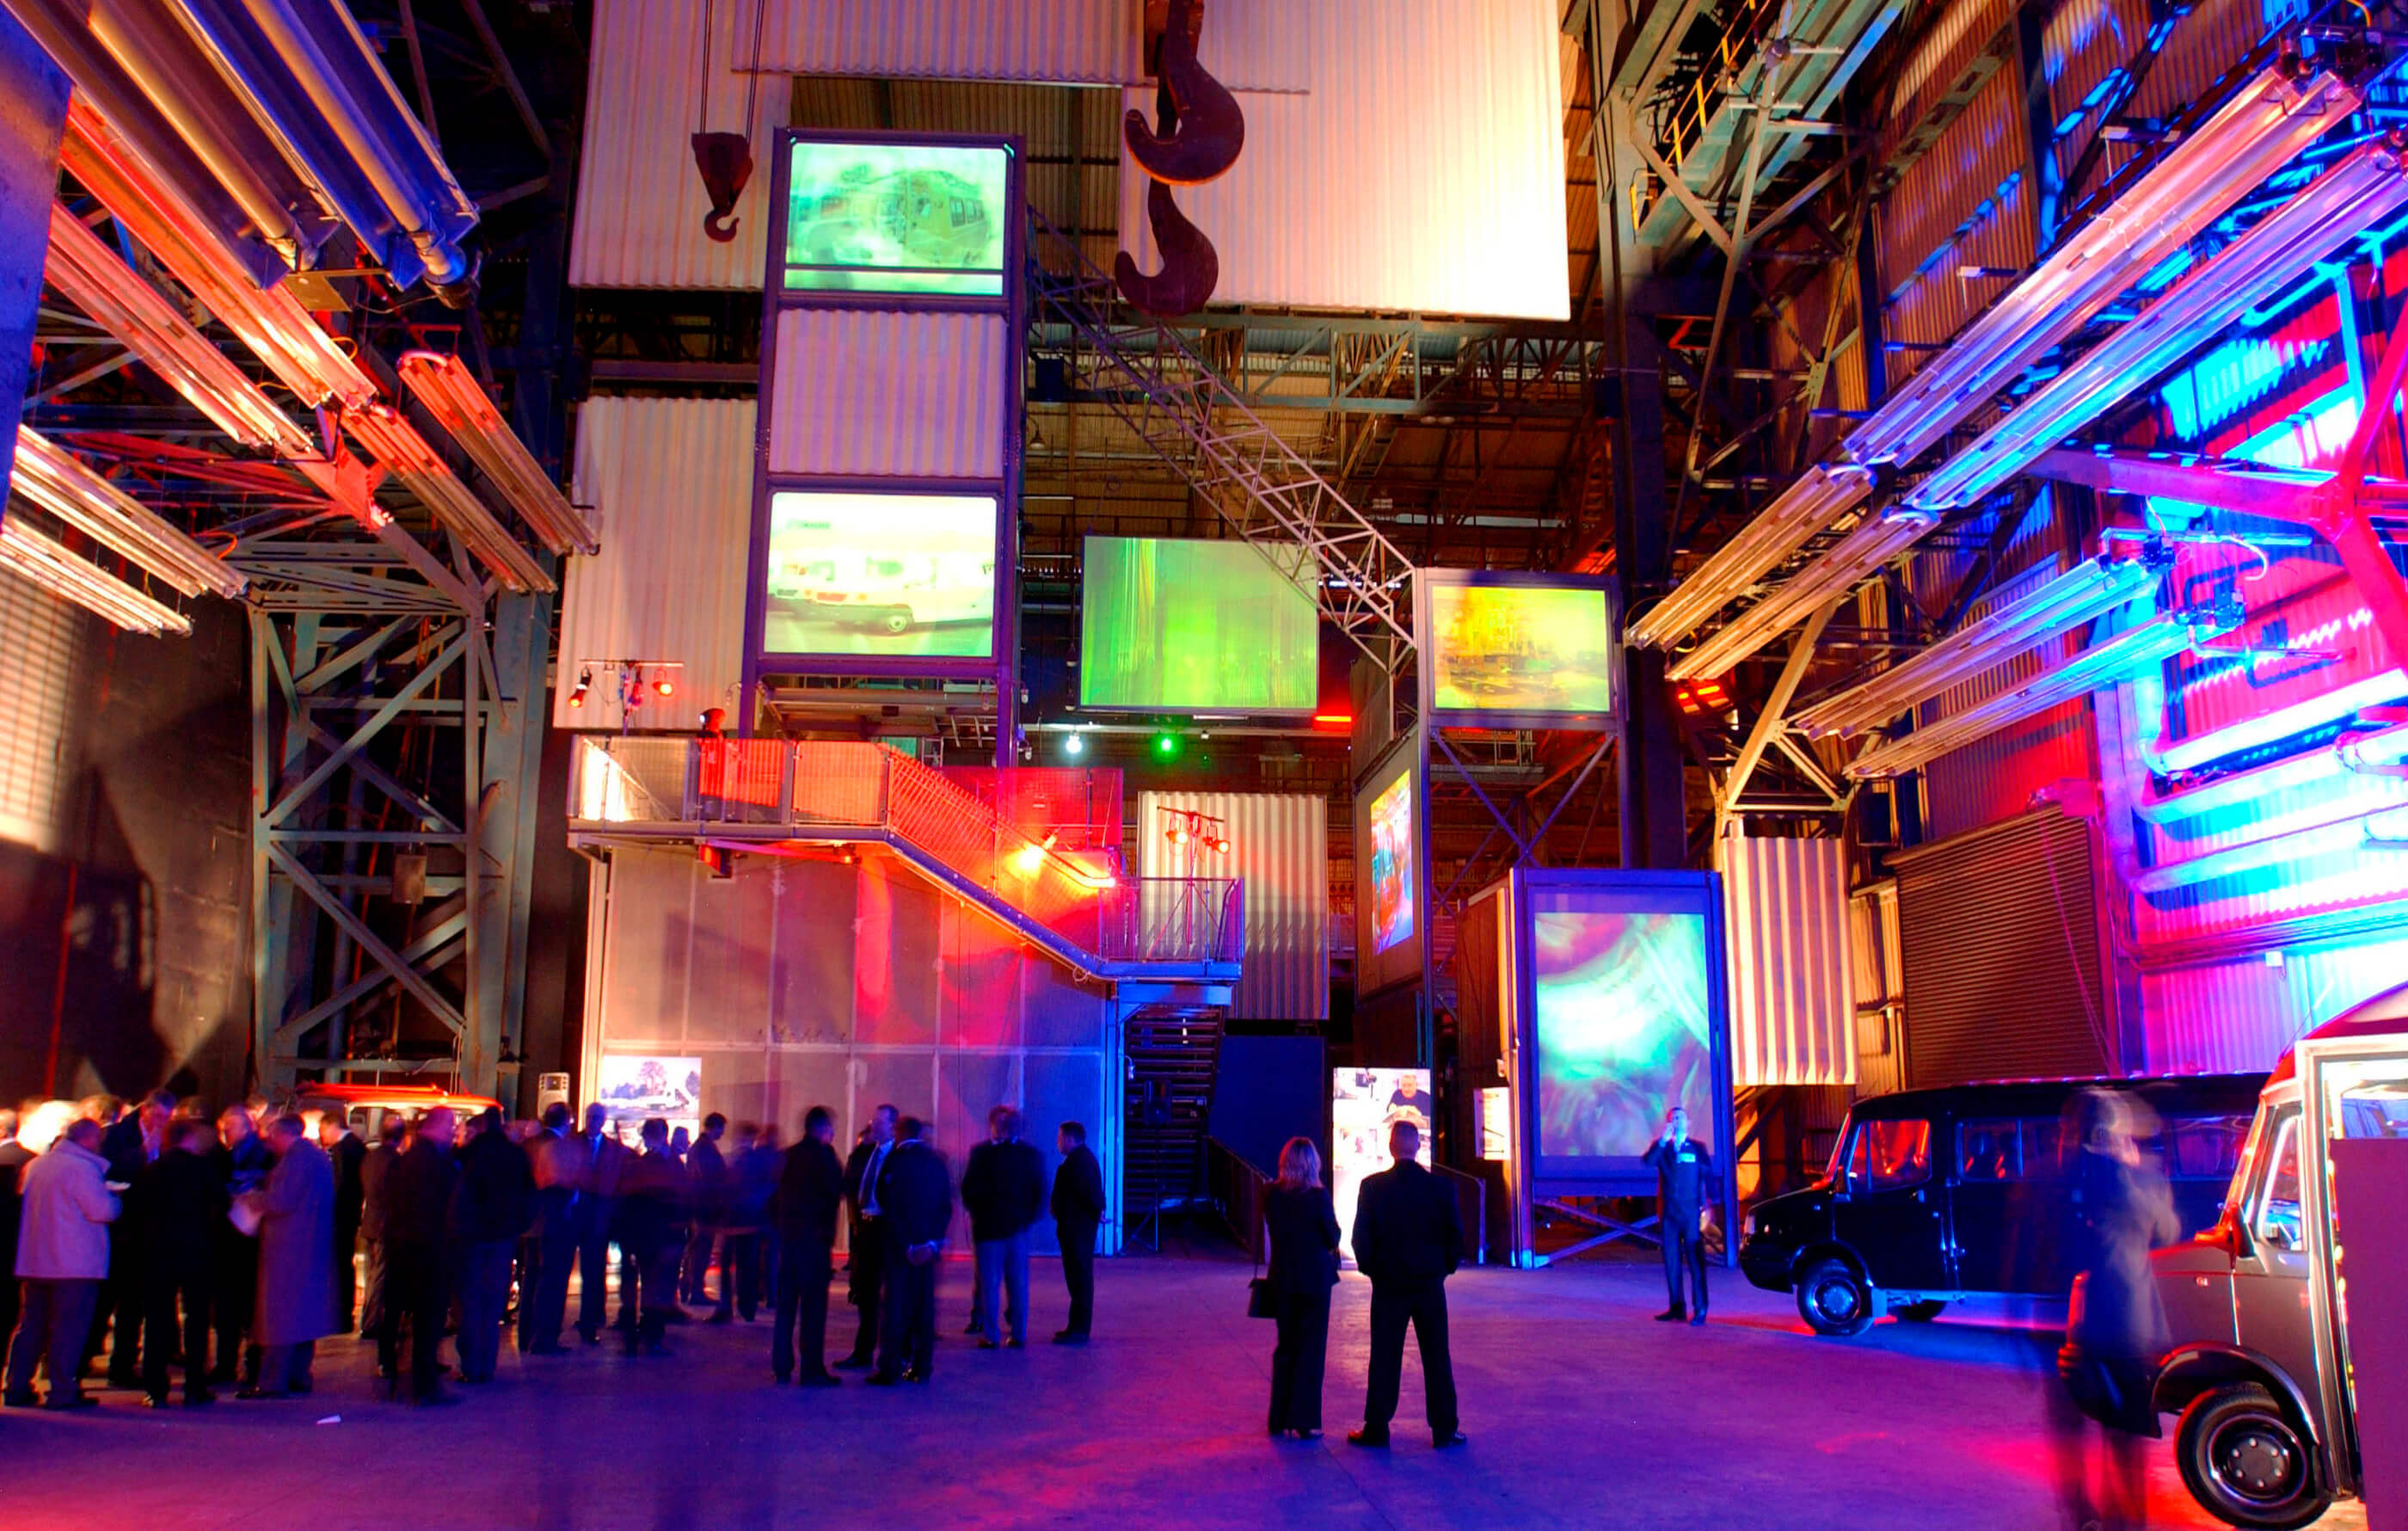 Full spread image of the inside of Magna, an iconic former steel works near Sheffield converted into an events venue